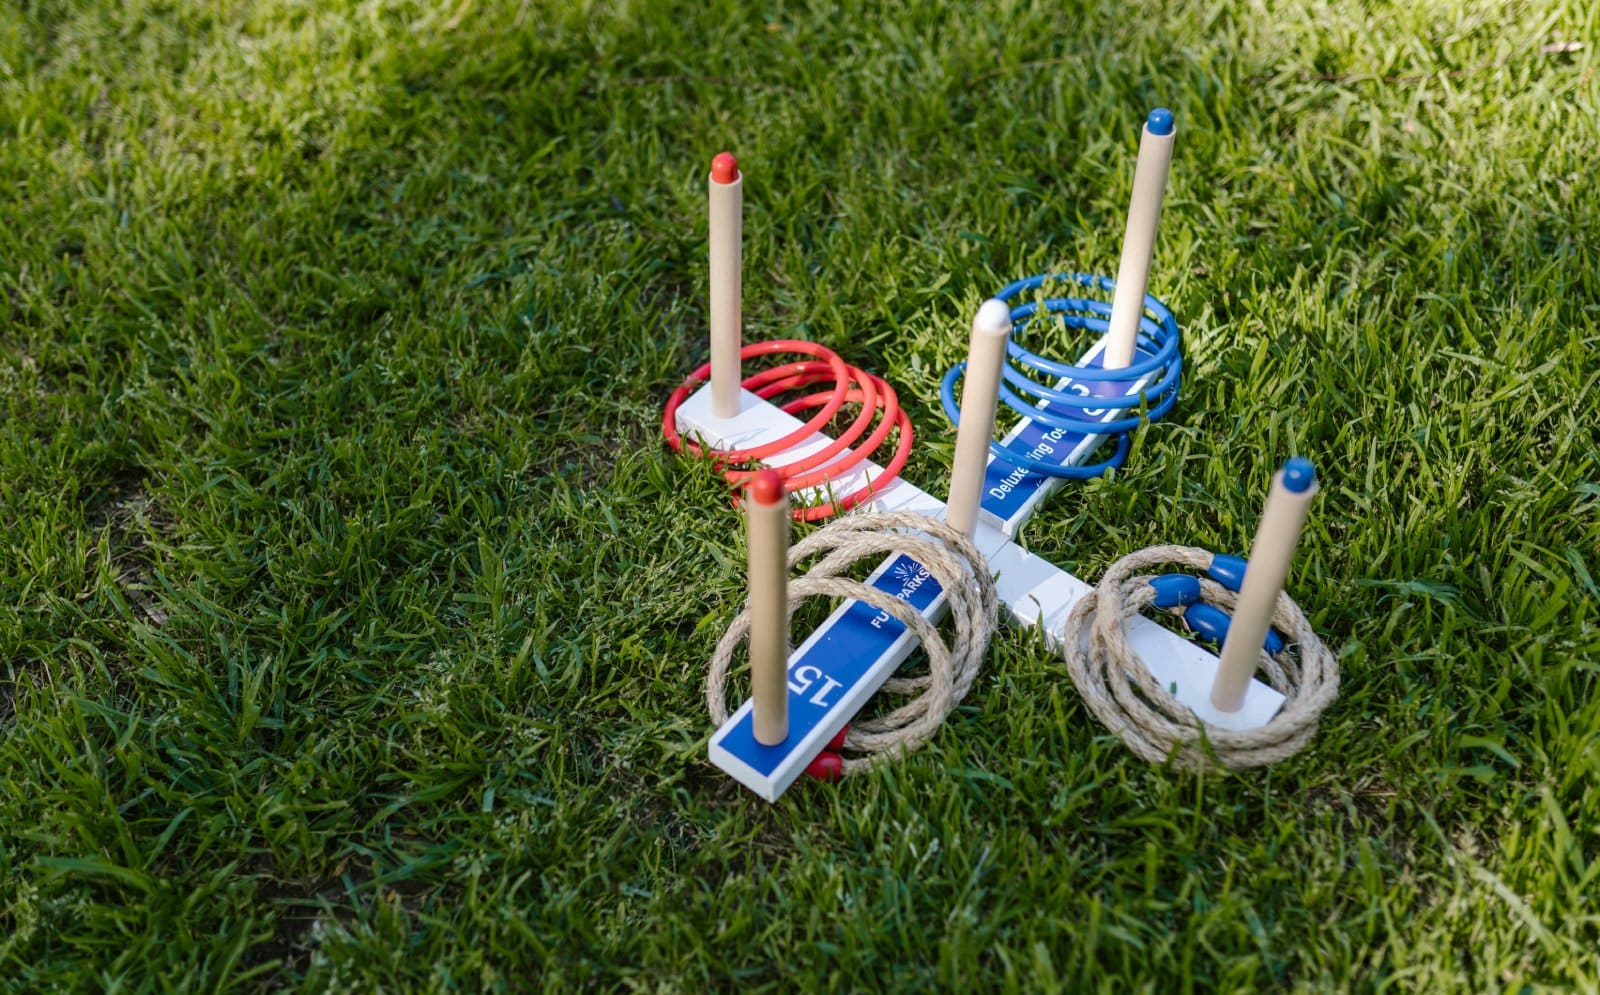 Image Credit: Pexel / RDNE Stock project <p><span>Ring Toss improves hand-eye coordination and precision. It’s a quieter activity that can help calm down more boisterous play and involve participants who prefer less physically demanding activities.</span></p>